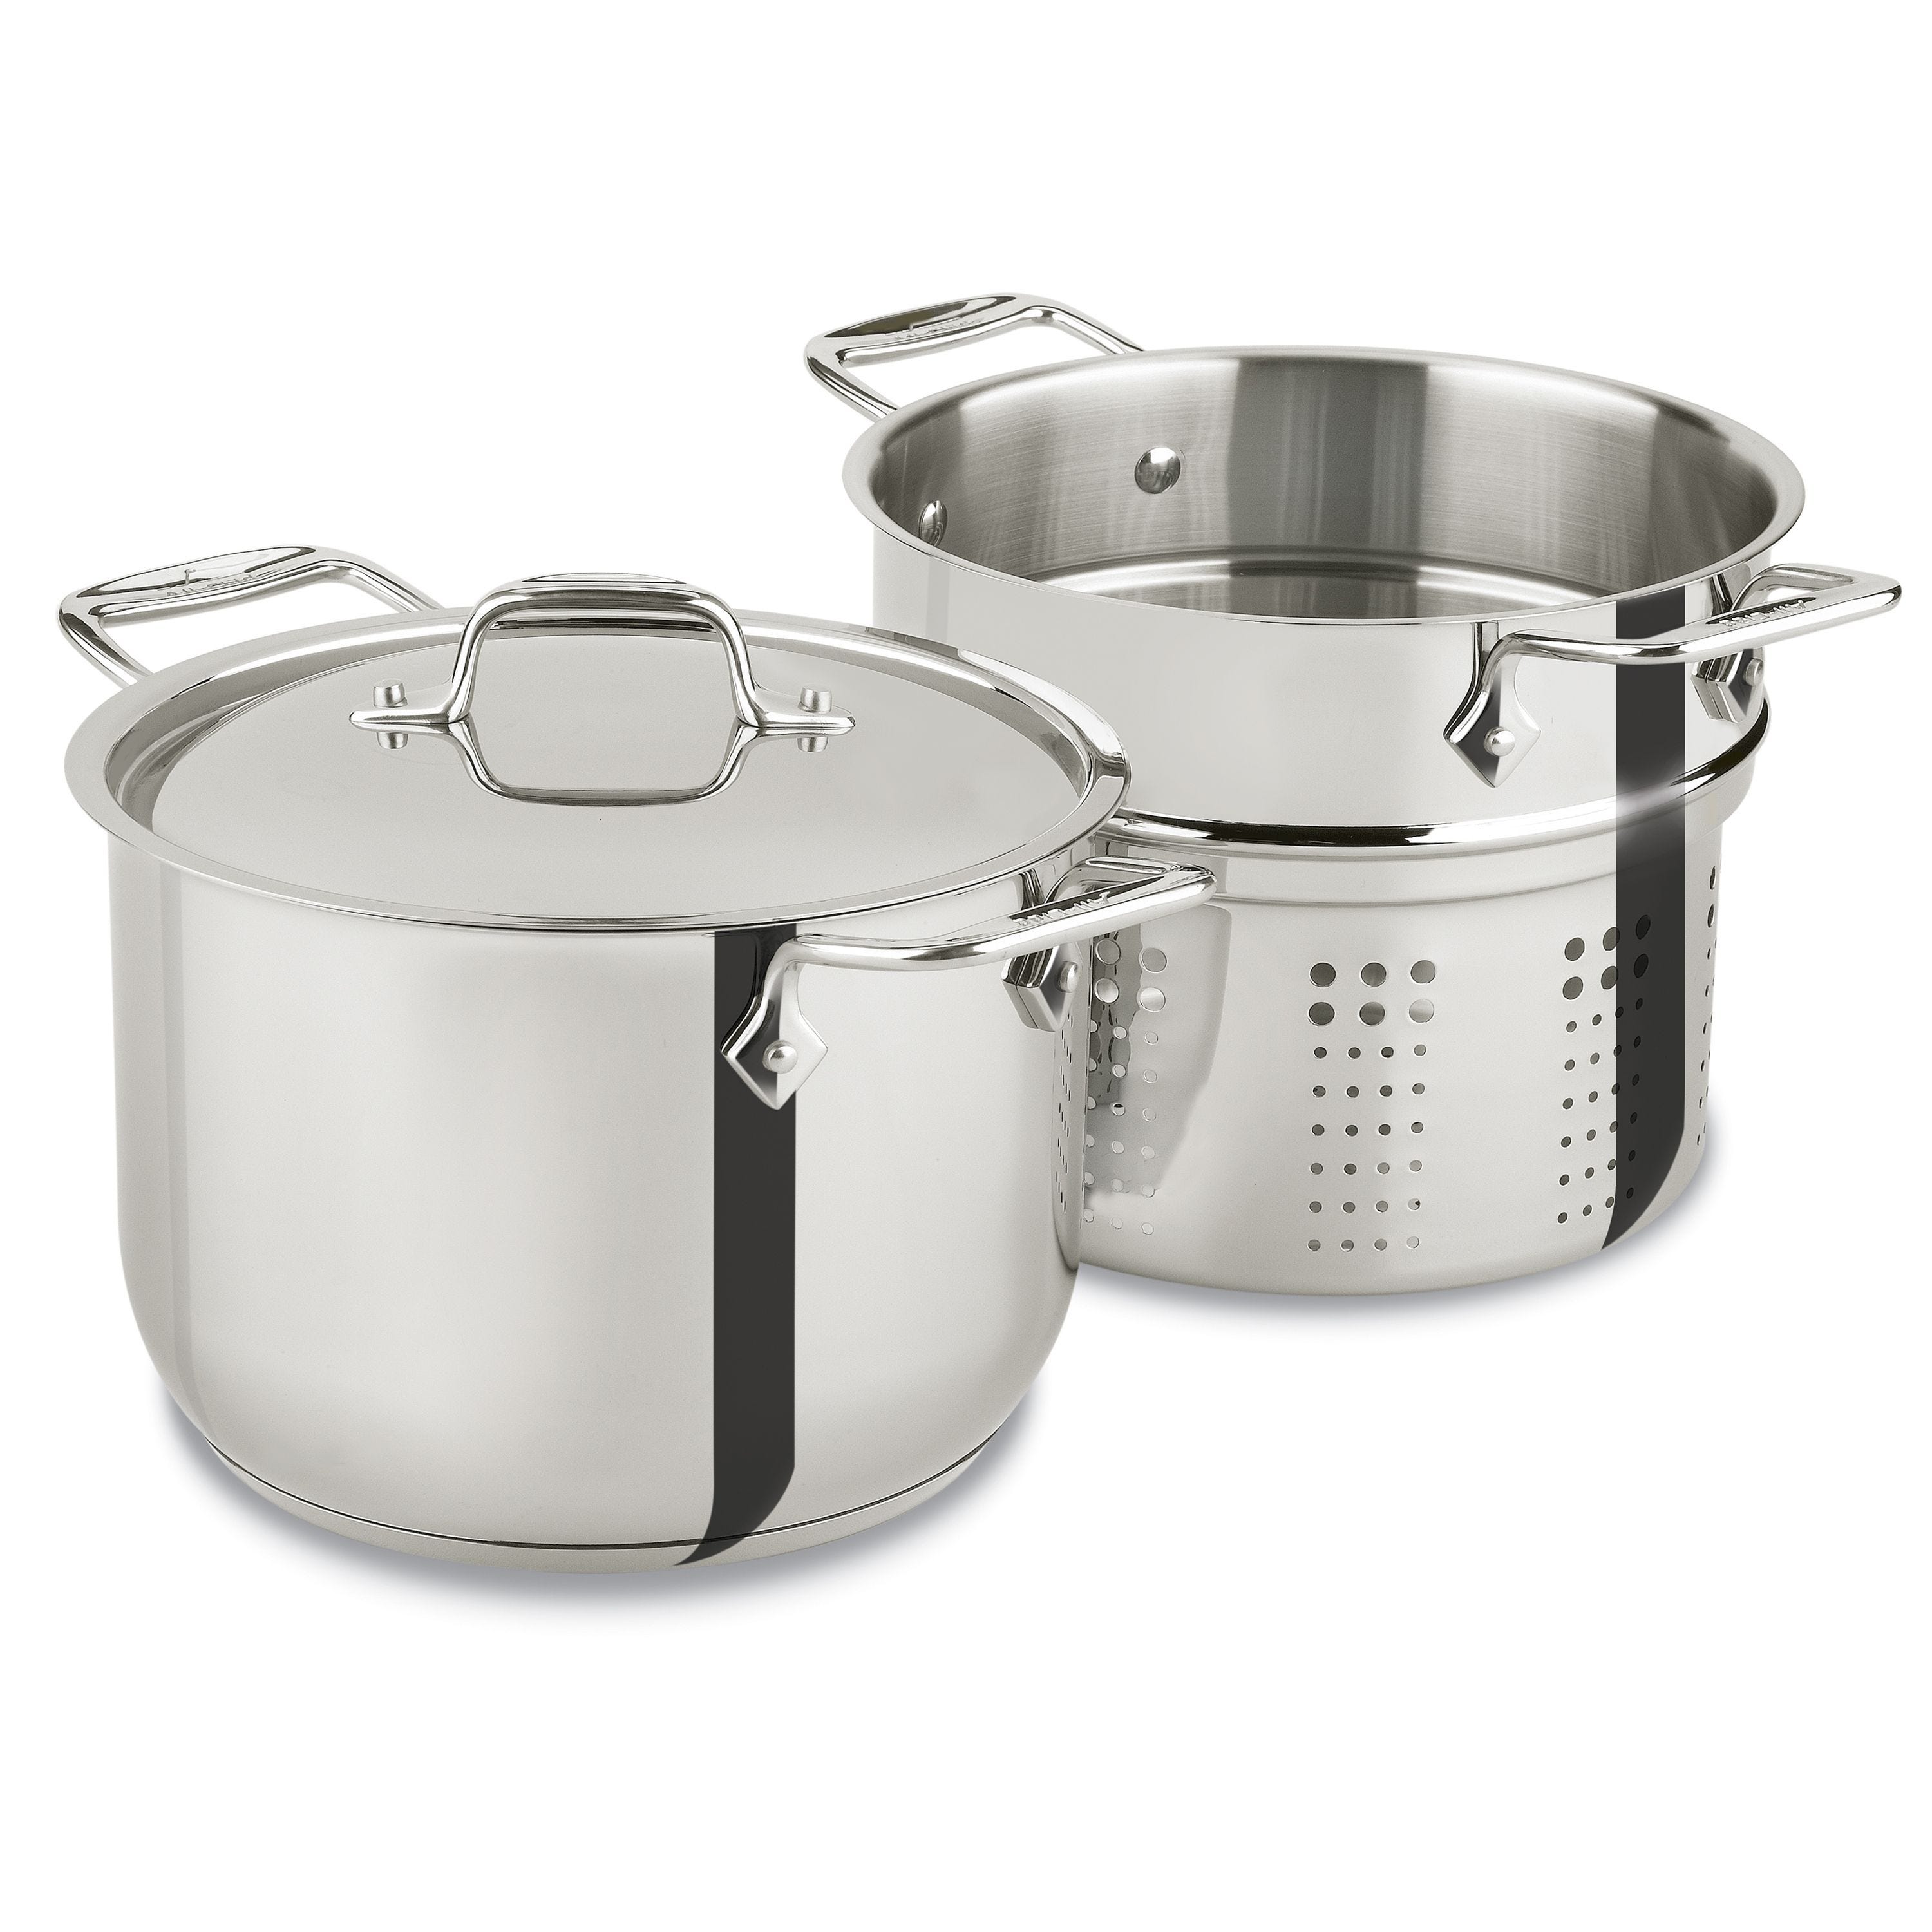 All-Clad Stainless 12 qt. Multi Cooker with Steamer Basket